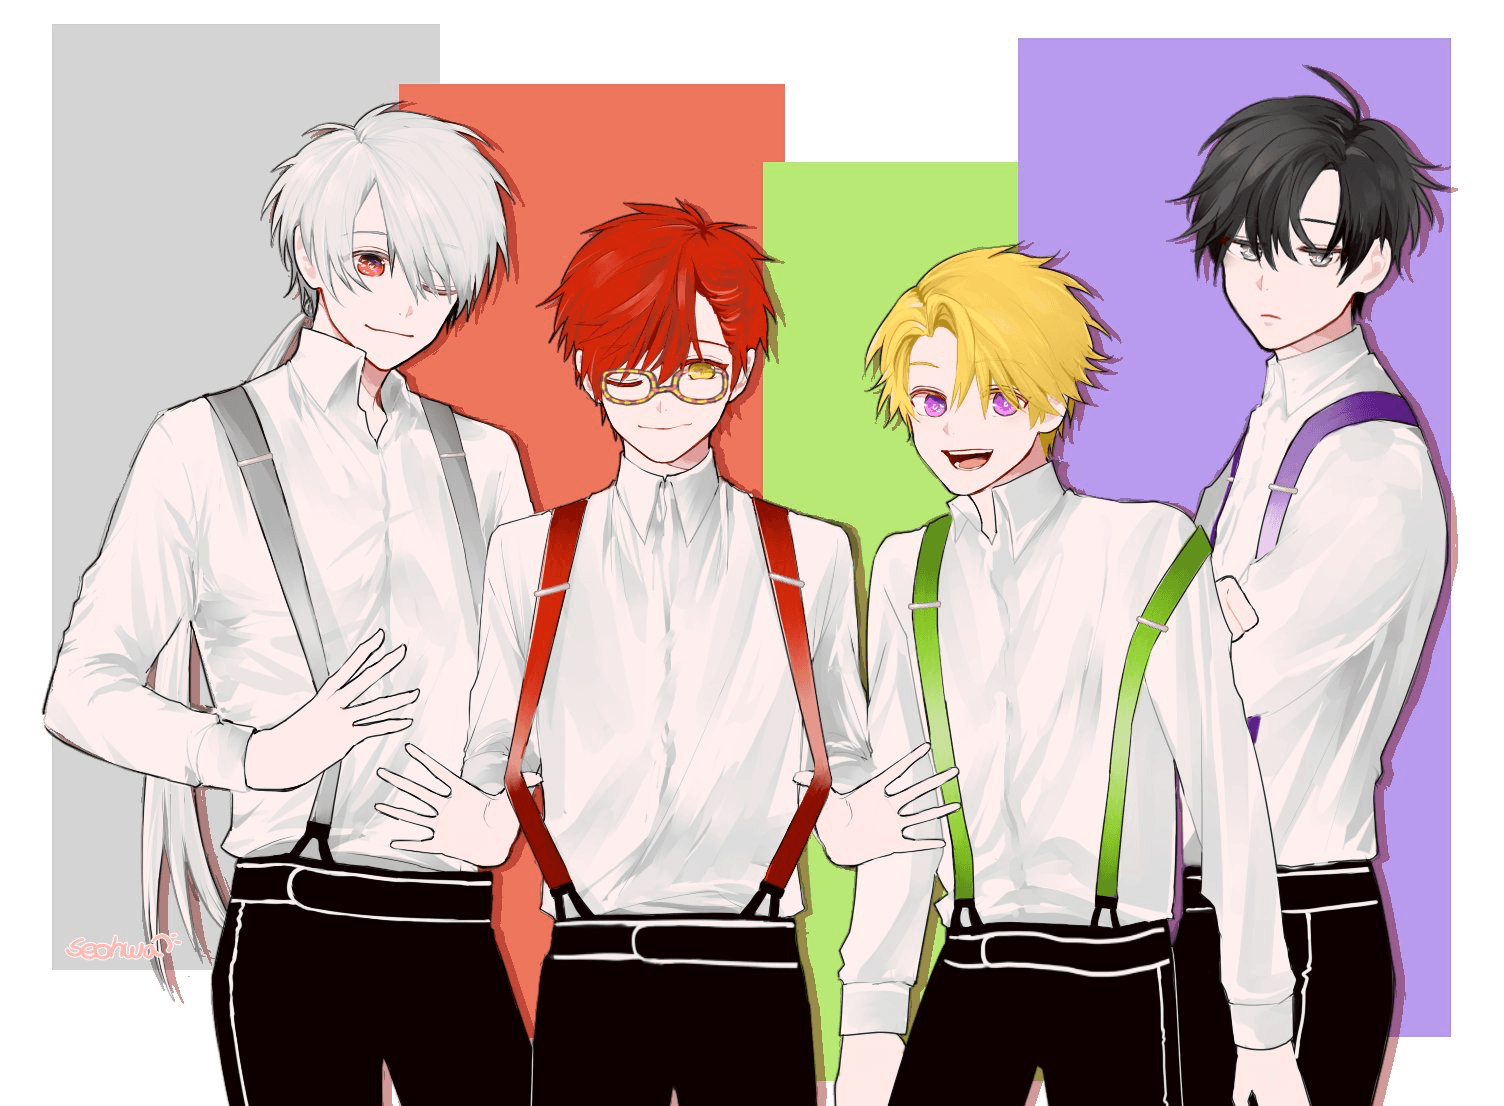 Zen, 707 (Luciel my baby), Yoosung and Jumin (my daddy)